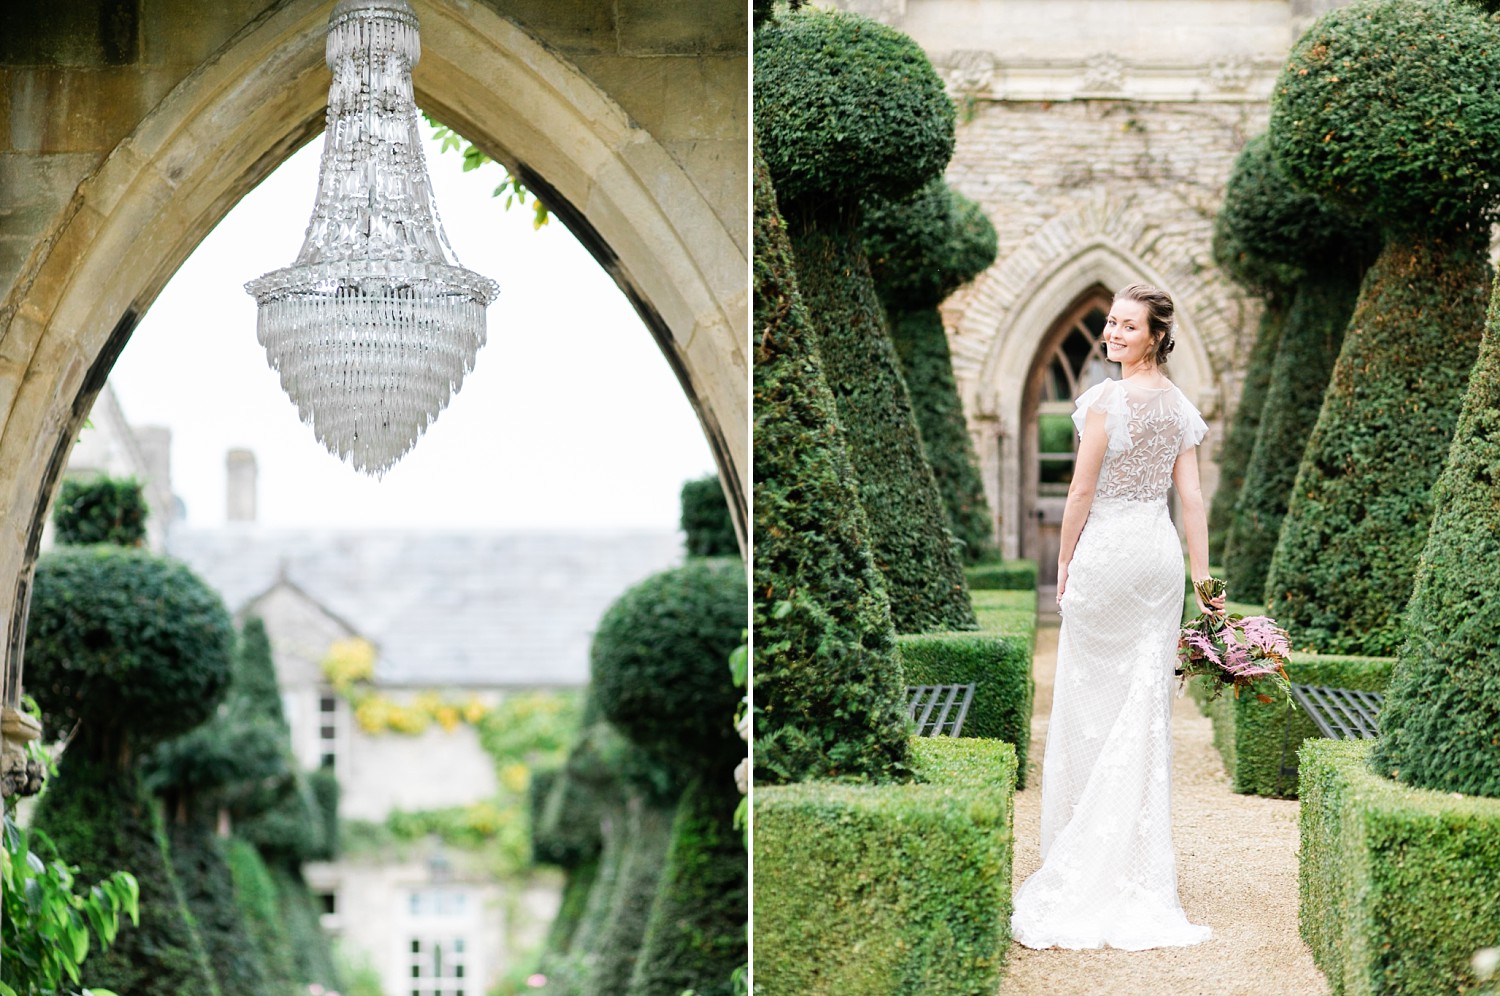 Bridal Inspiration at the Lost Orangery in the Cotswolds